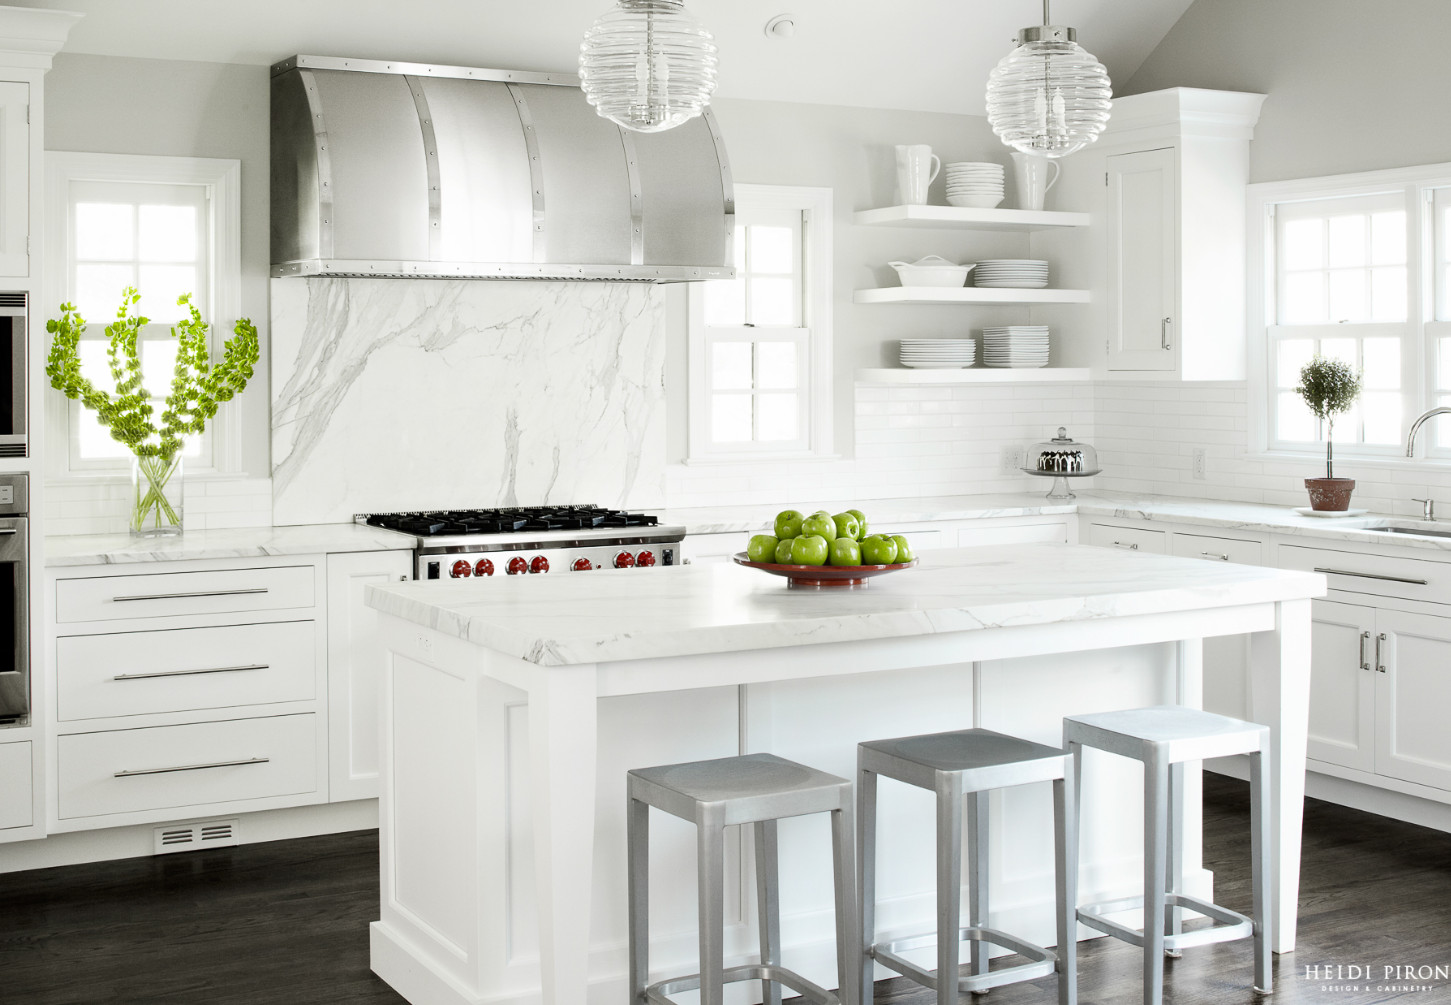 Kitchen Hood. White Kitchen hood. The custom-made brushed and polished range hood is the focal point of this kitchen. #Kitchen #Hood #KitchenHood Heidi Piron Design & Cabinetry.